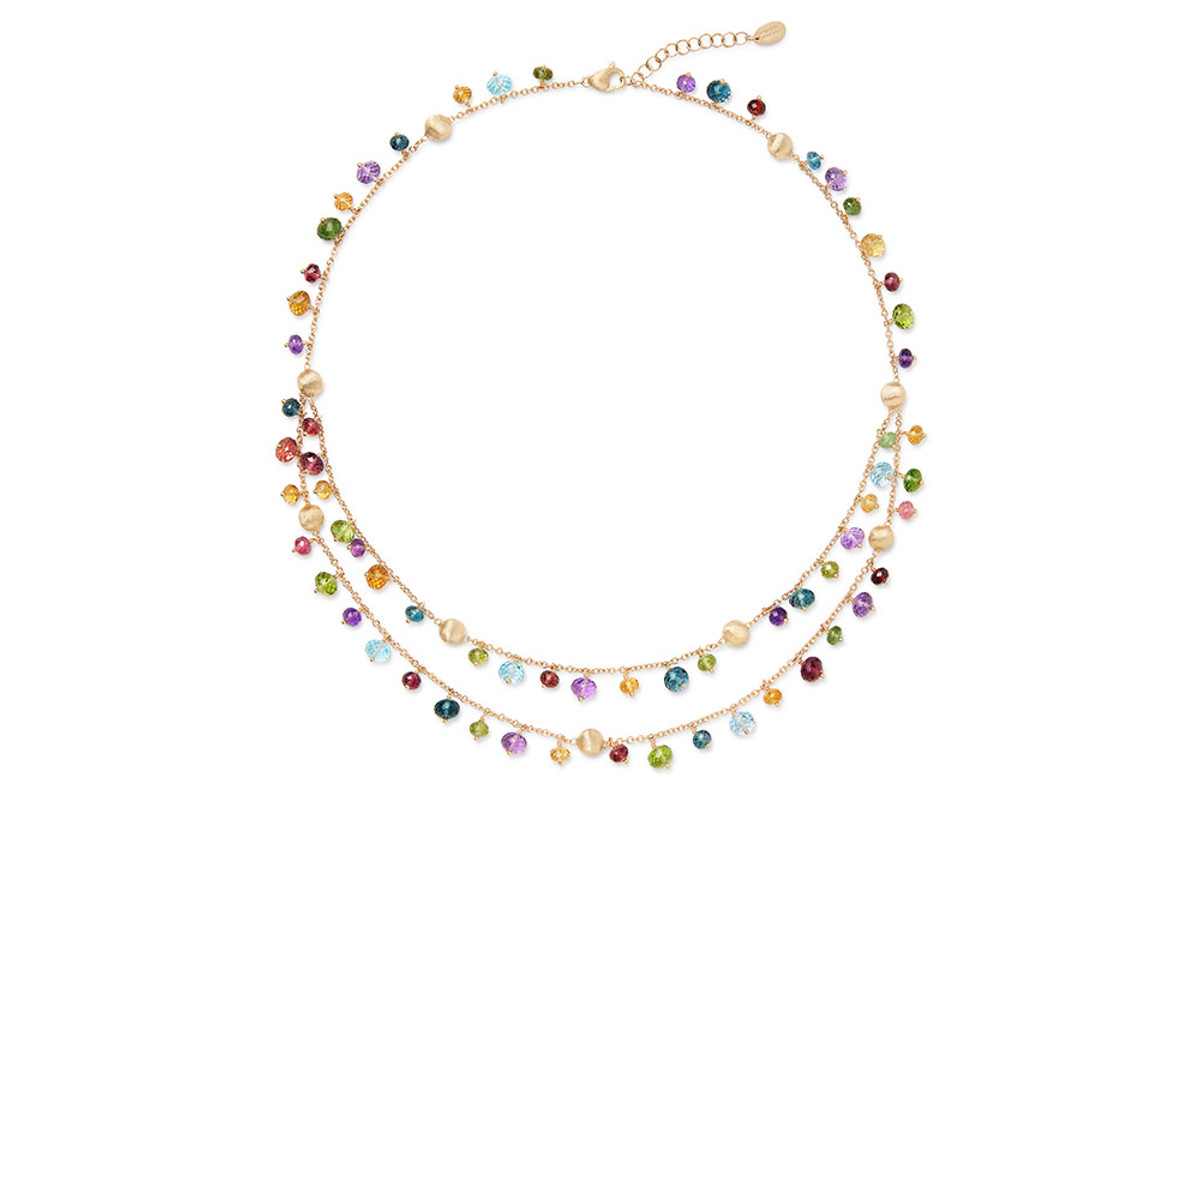 Marco Bicego Africa Collection 18K Yellow Gold 2-Strand Mixed Gemstone Necklace-61186